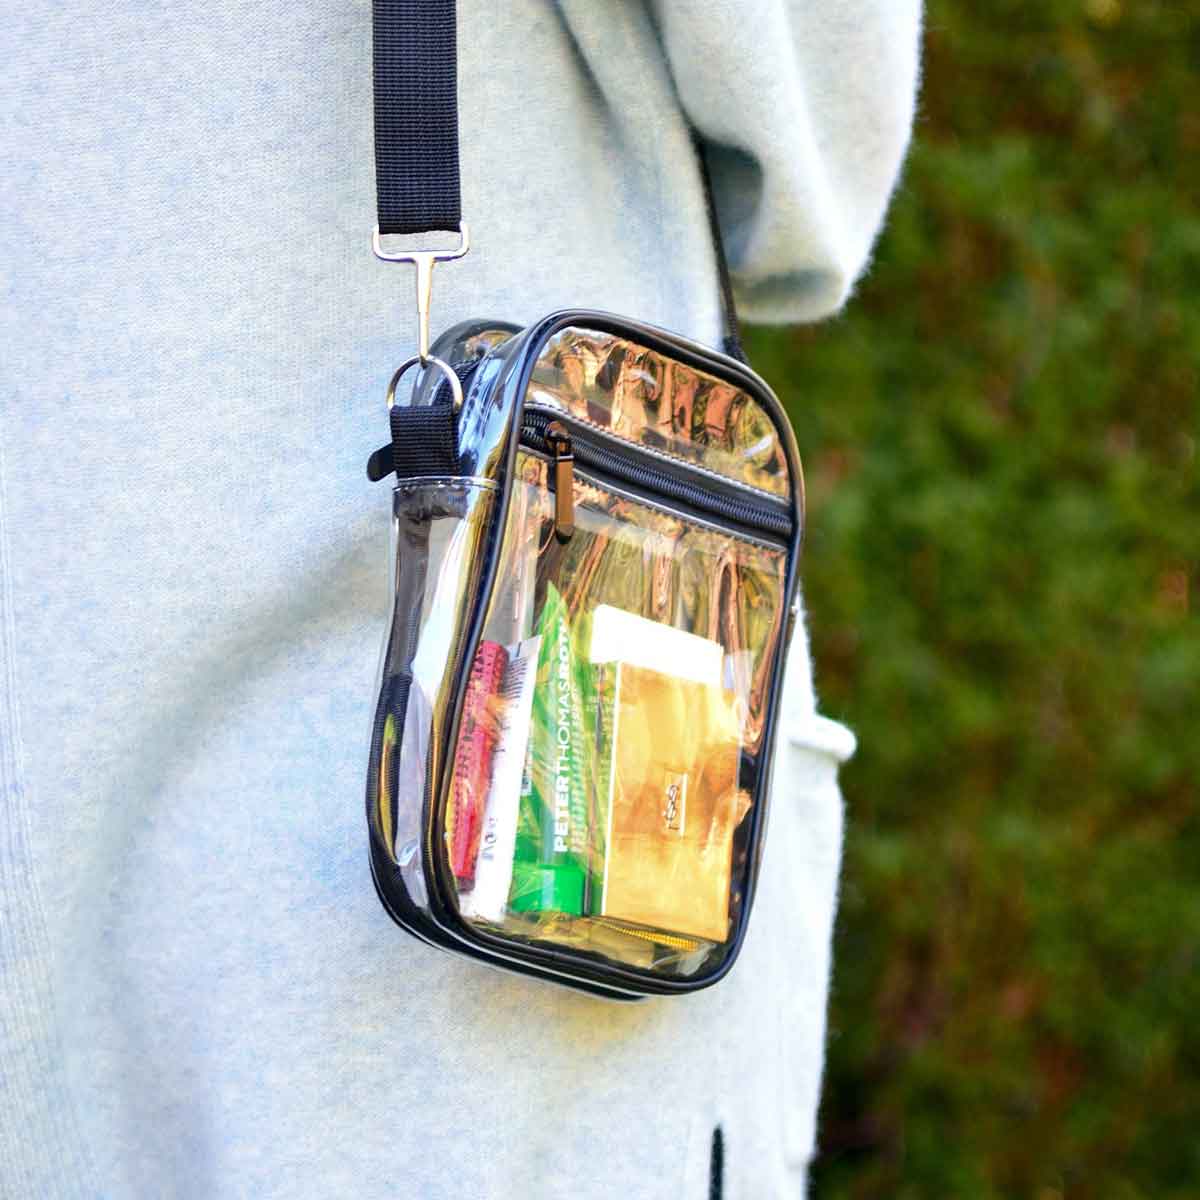 Clear Cross Body Stadium Bag, with black strap measurements : 7.7" x 6" (stadium approved!)